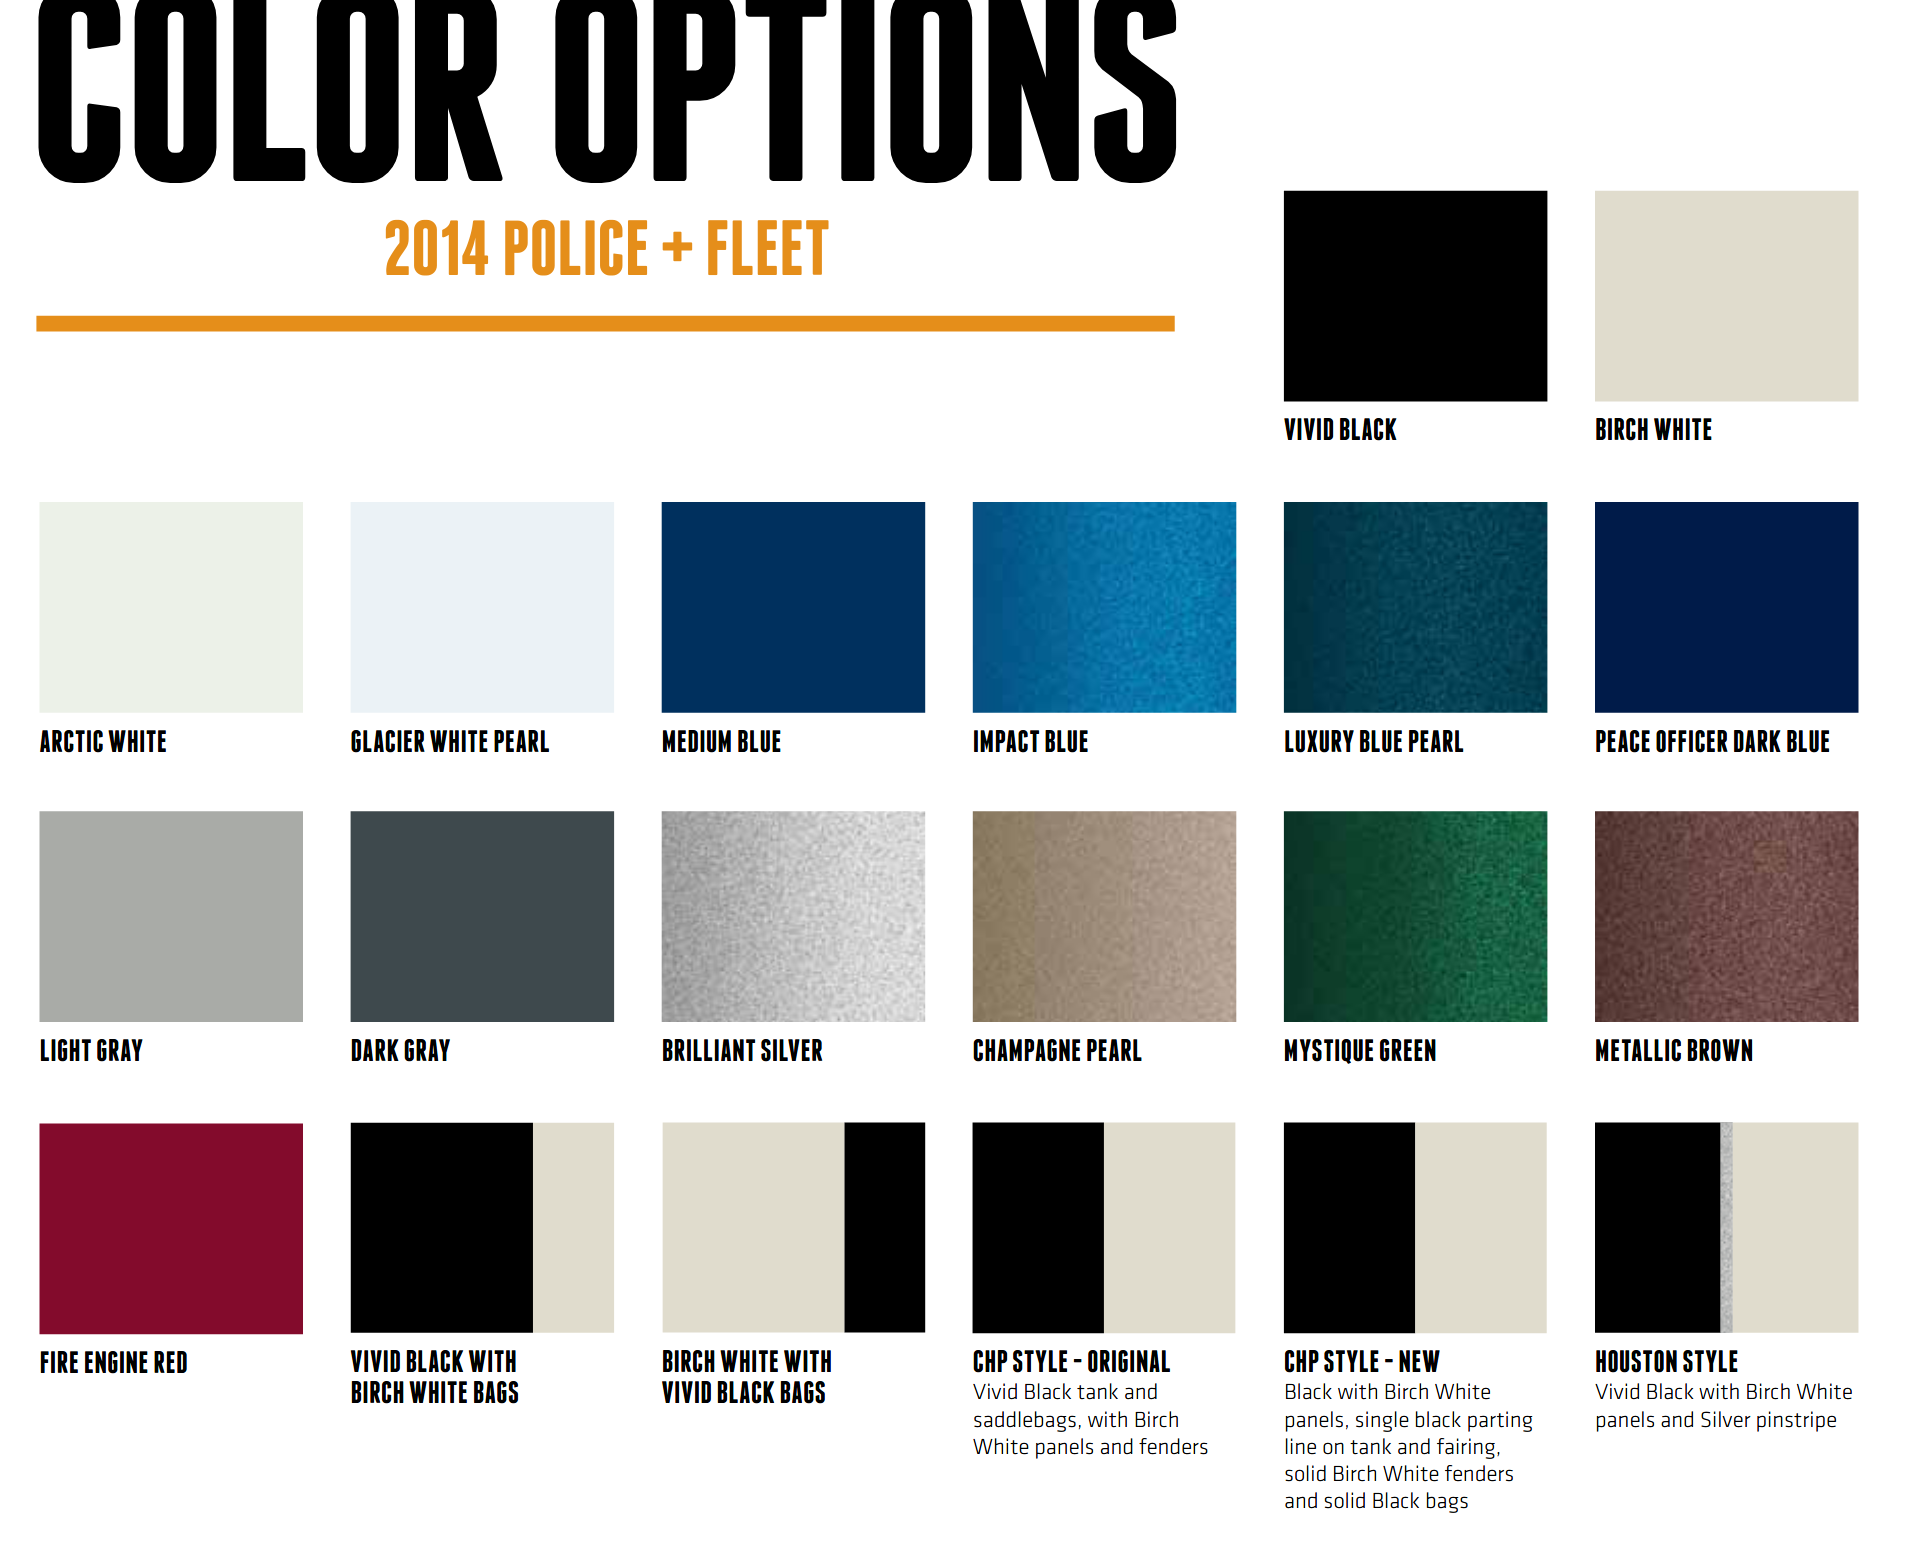 Paint colors used on Harley Davidson motorcycles in 2014